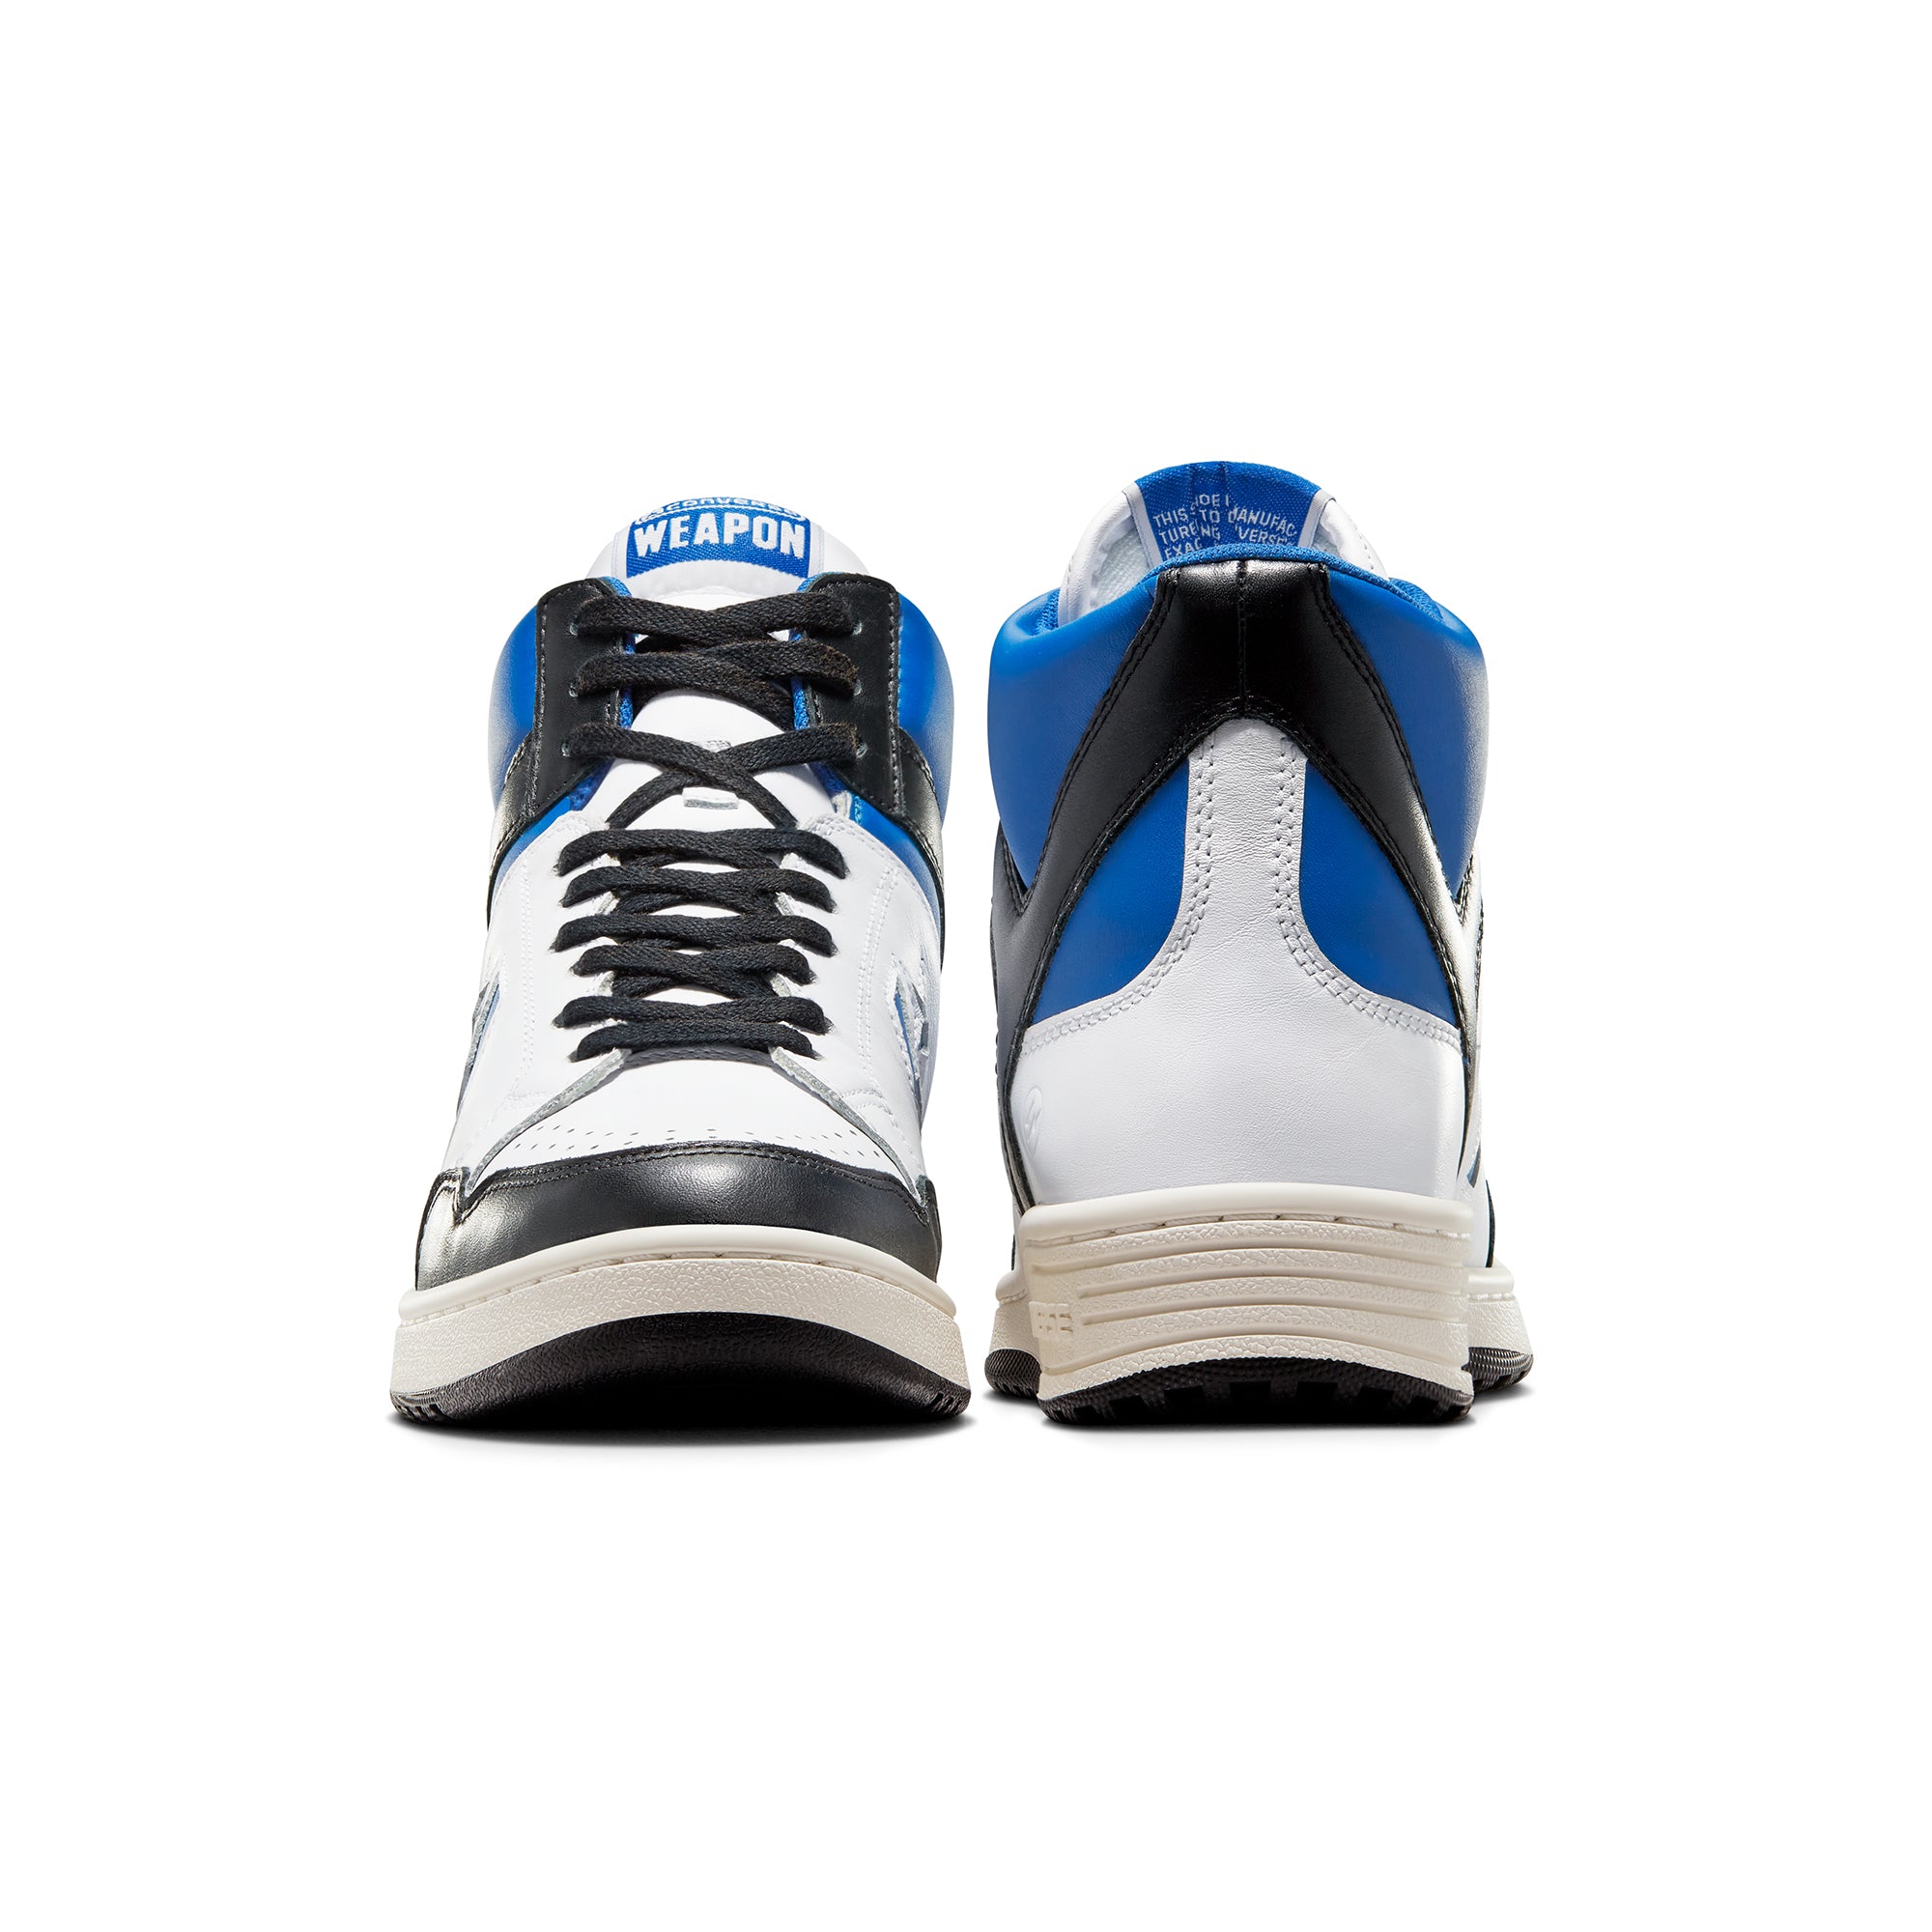 Converse x Fragment Weapon Mid Shoes